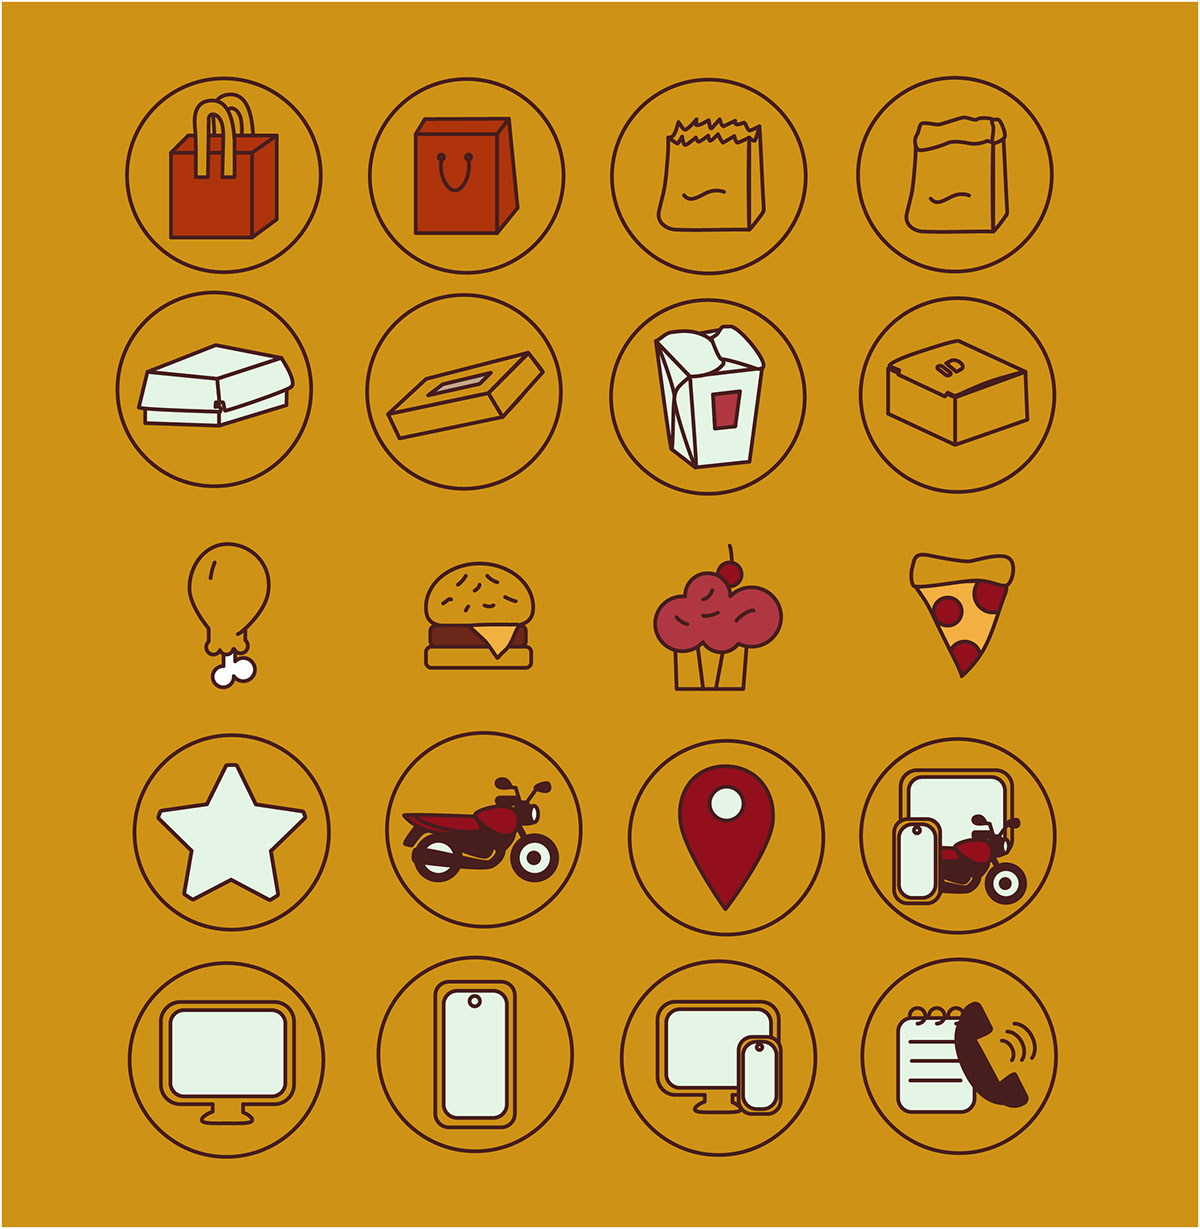 Delivery icons rendition image